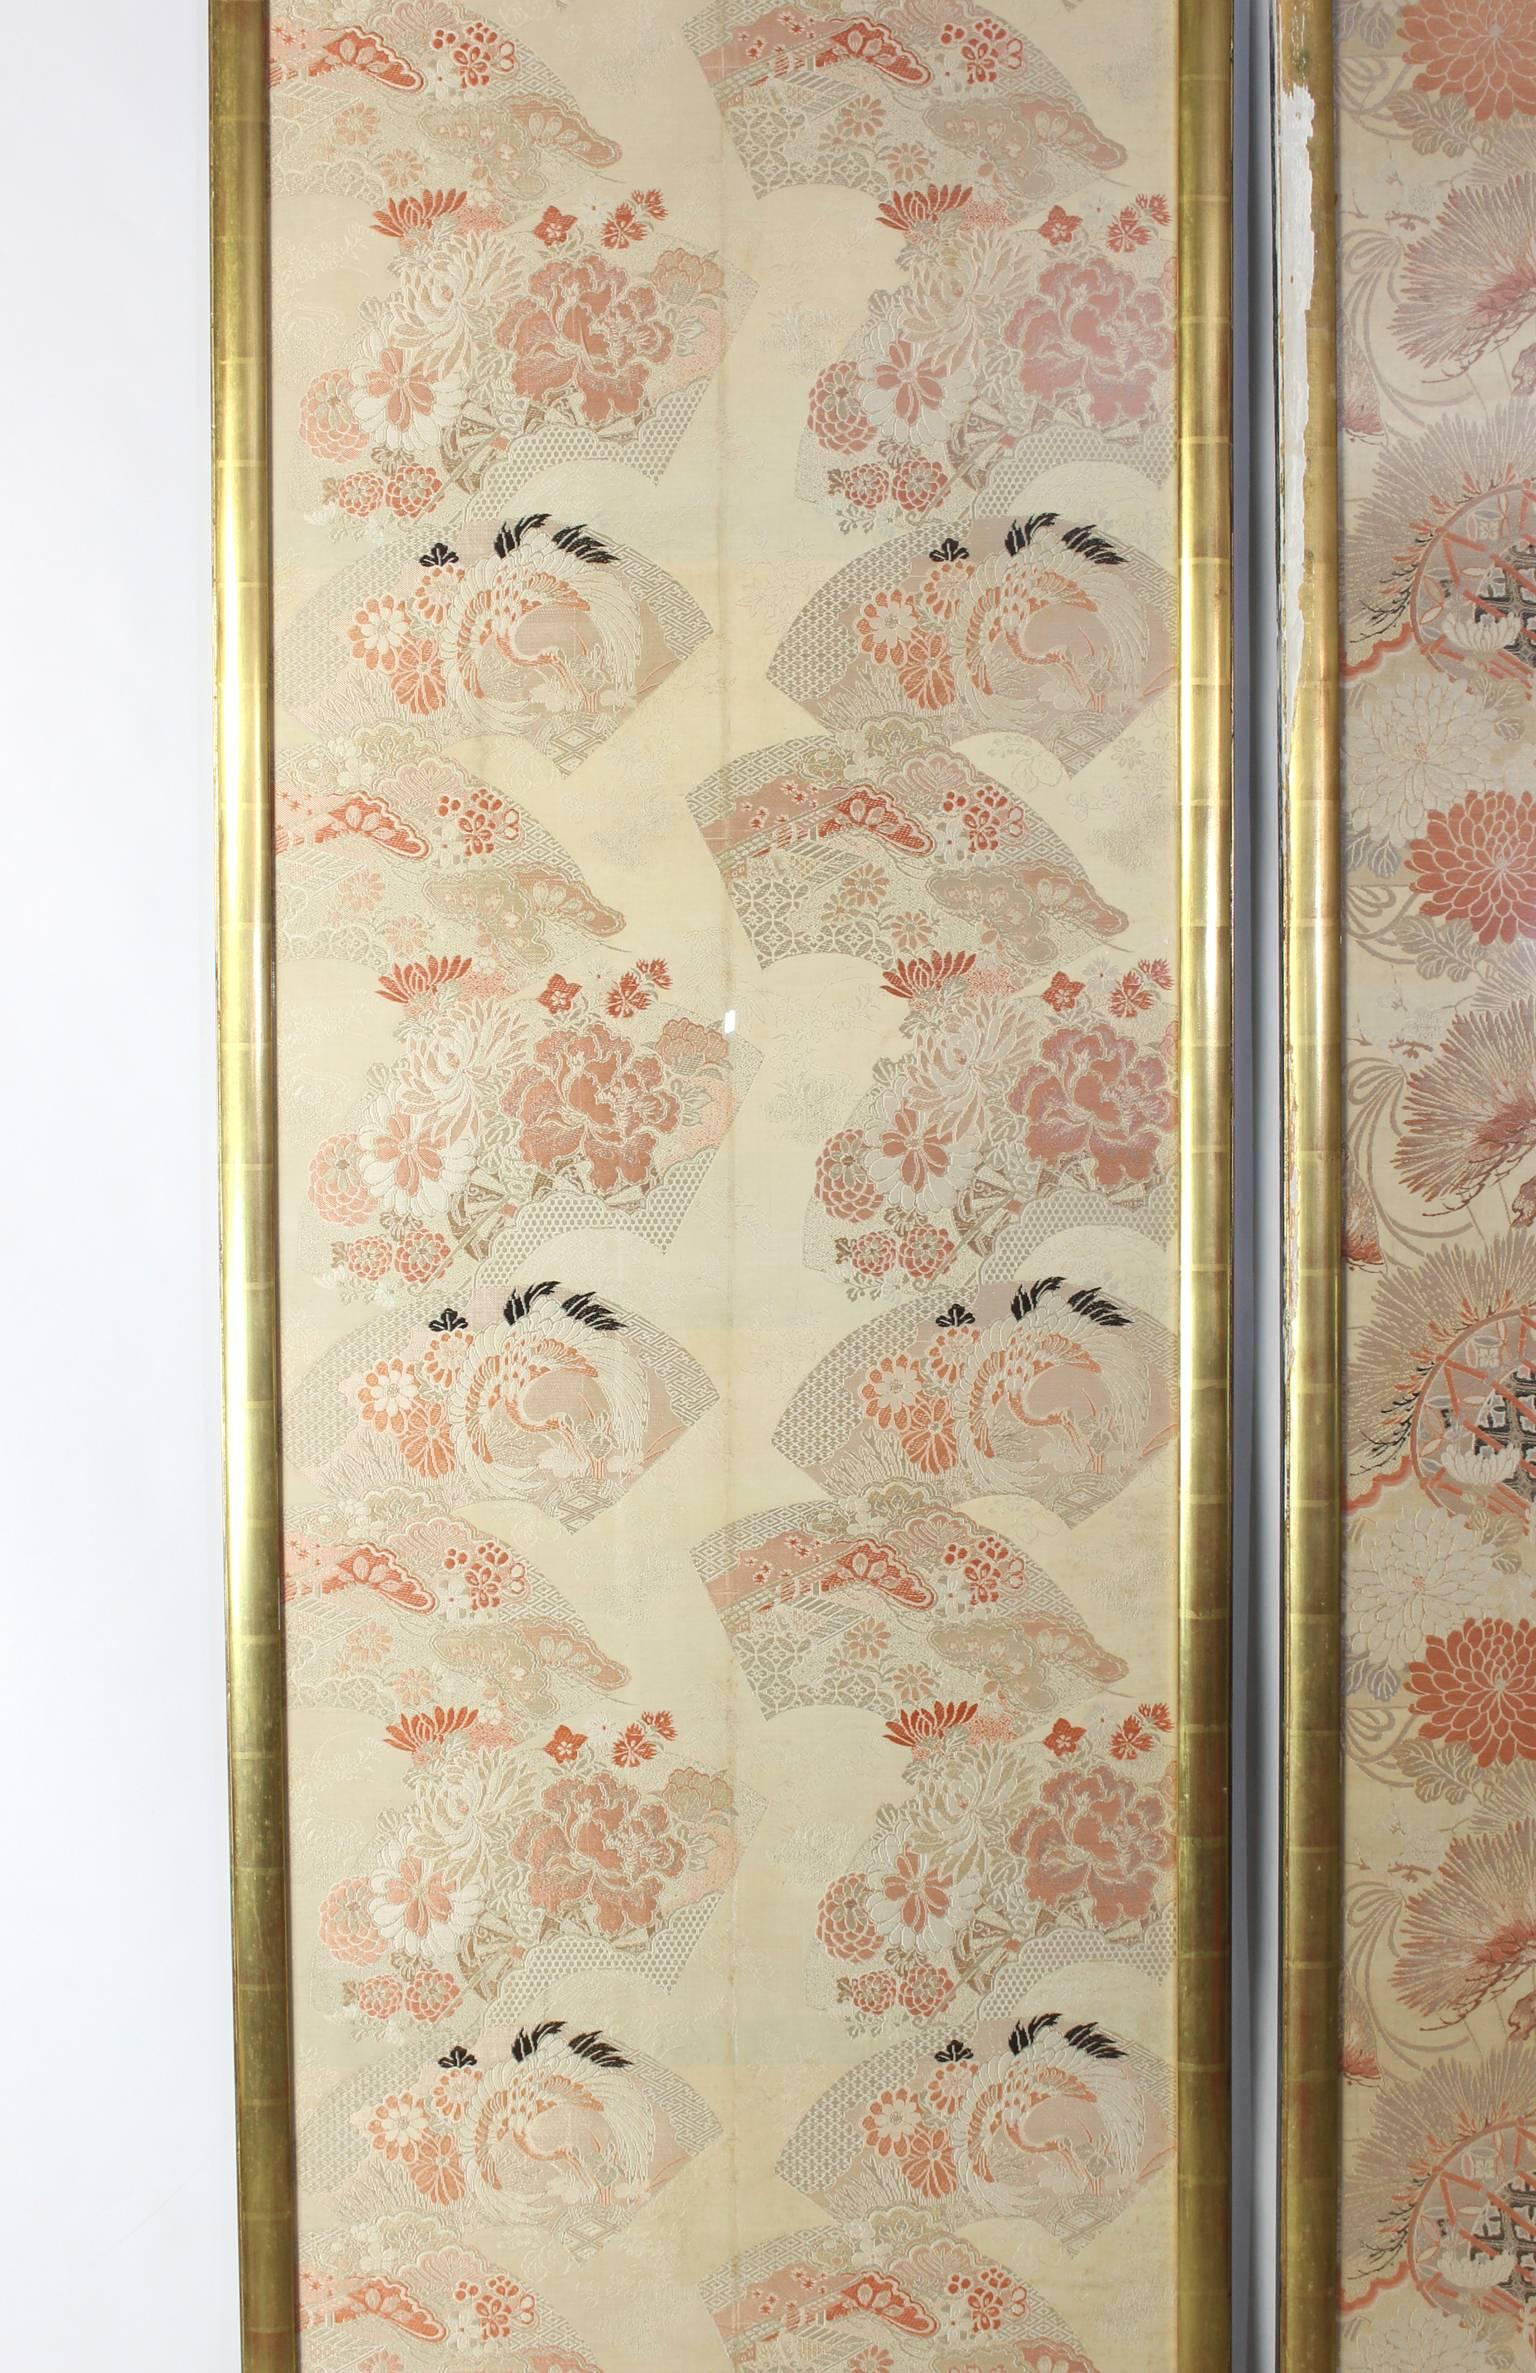 Exceptionally Large Japanese Brocade Silk Panels in Gilt Frames In Good Condition For Sale In Kilmarnock, VA